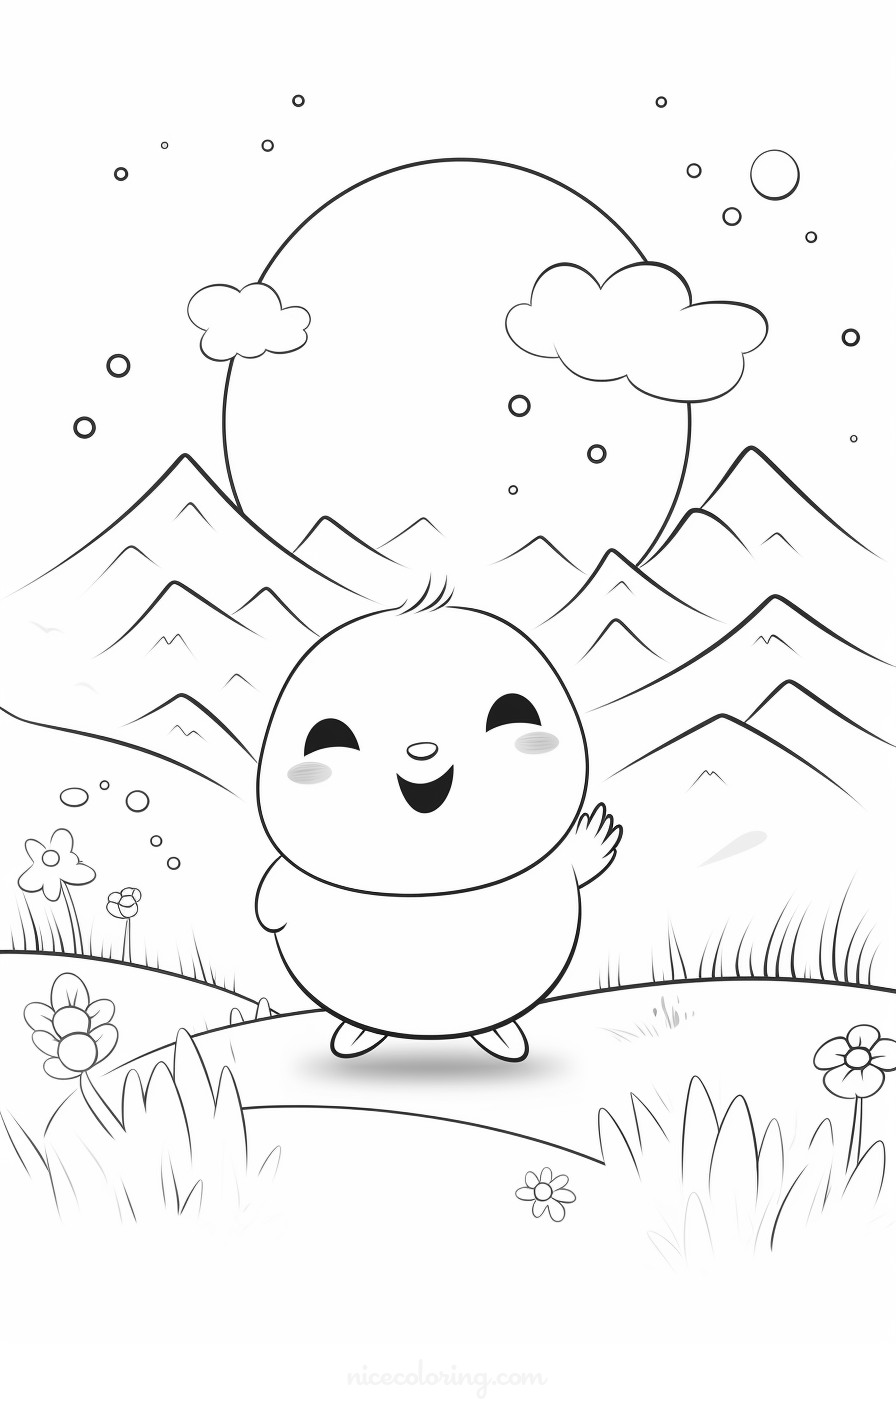 Eagle soaring high above mountains coloring page